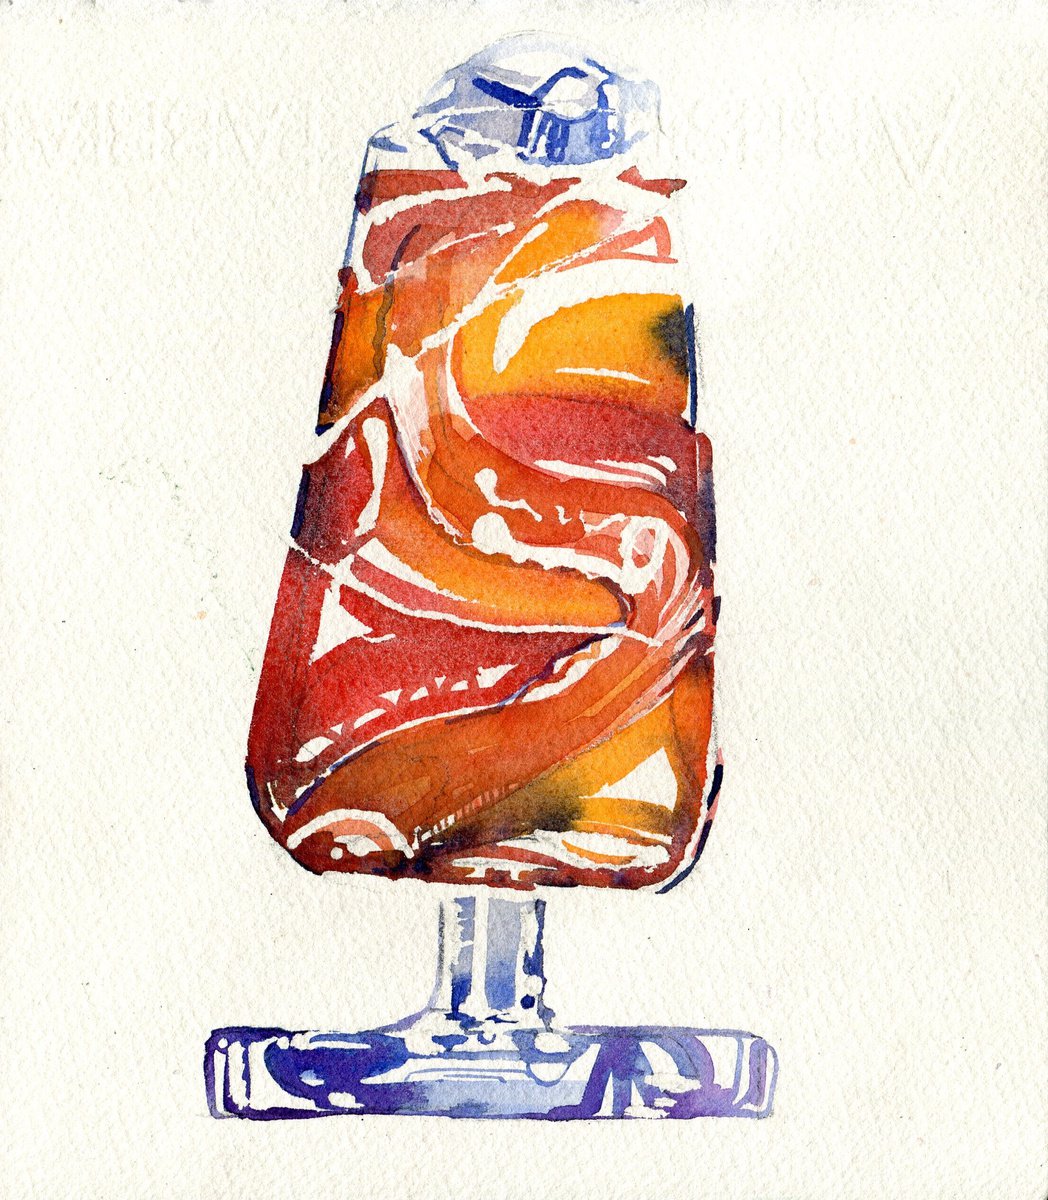 Cocktail no. 1 by Hannah Clark